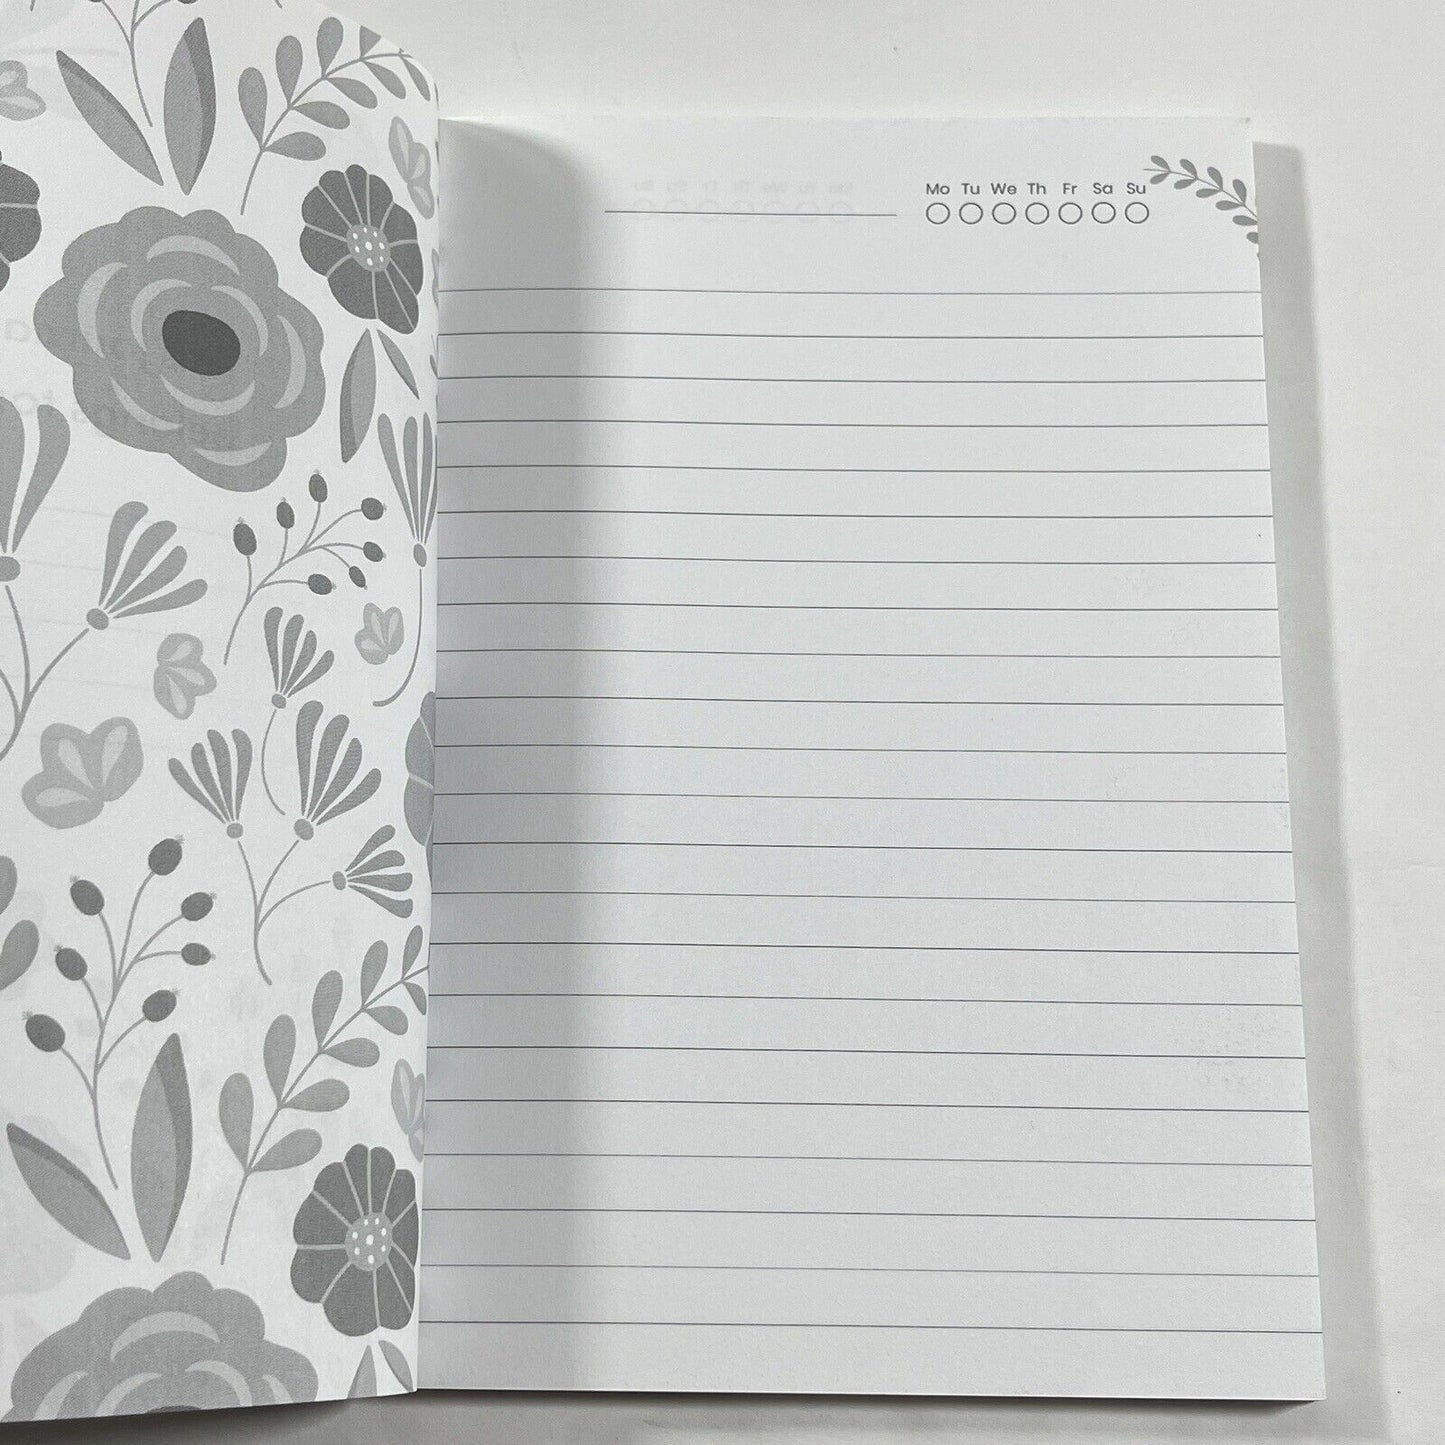 Floral Notebooks 6x9 Flowers Notepad Set Blank Lined 110 page Journal